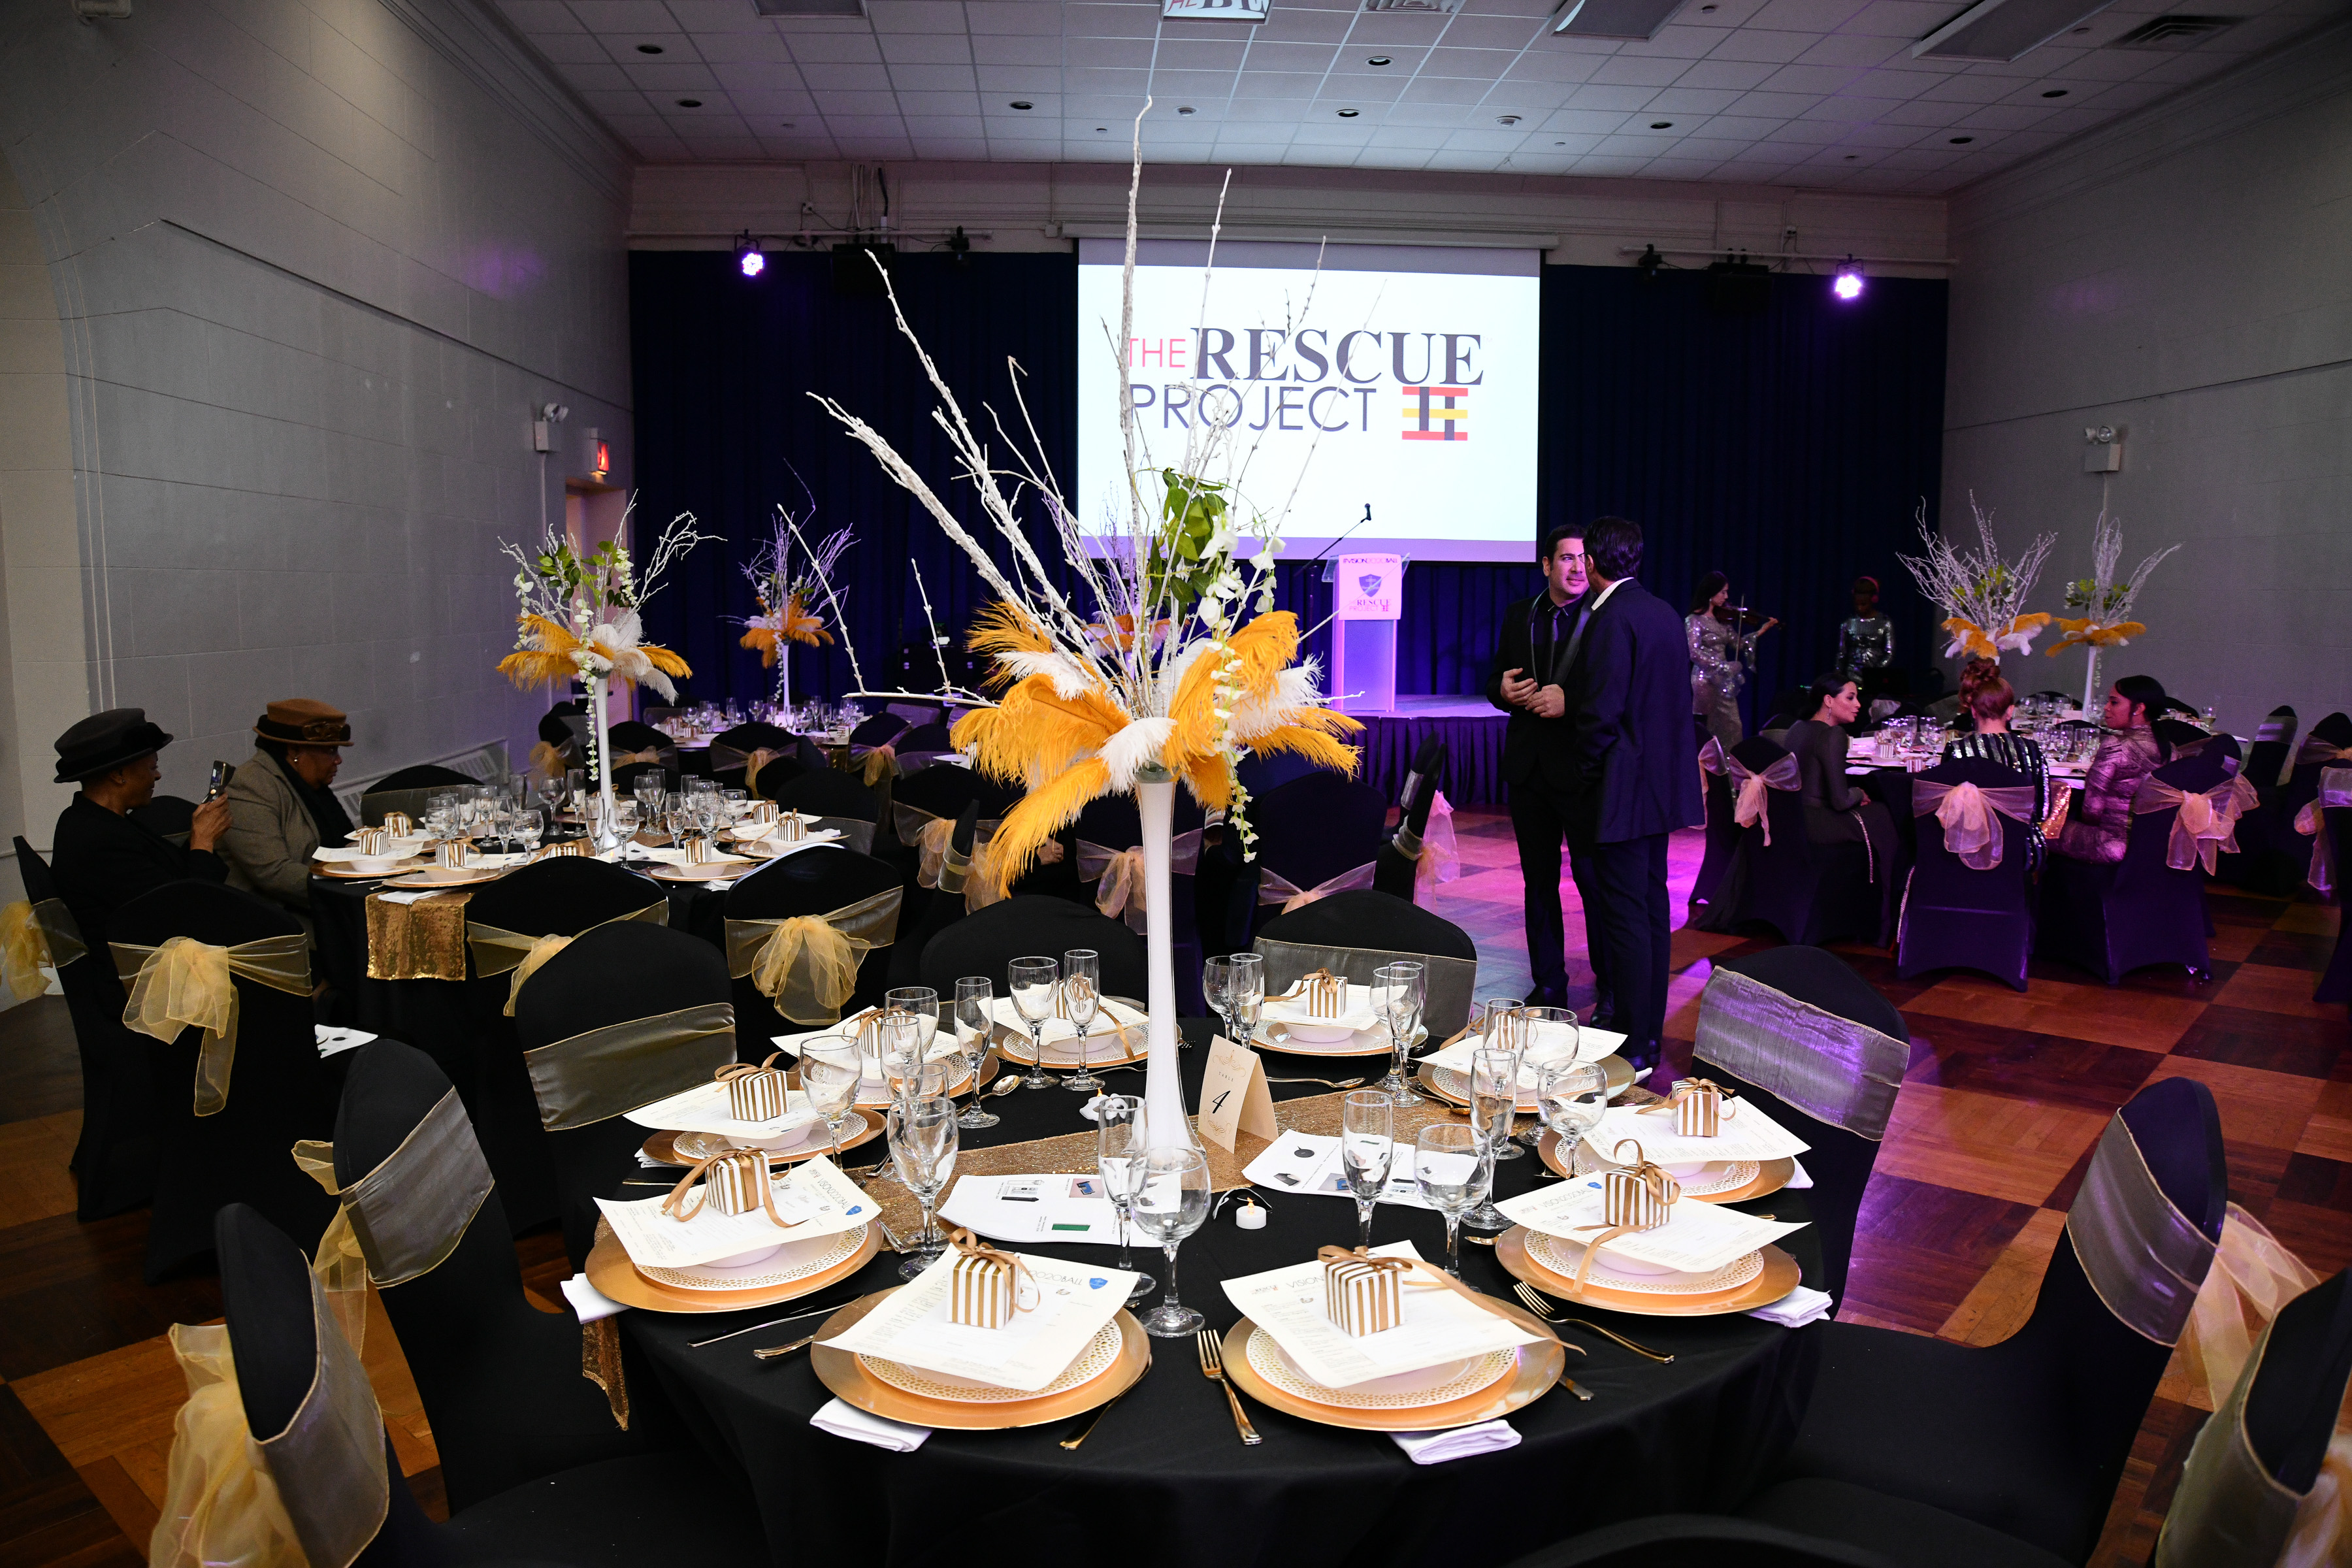 The Rescue Project’s Second Annual Vision 2020 Benefit Ball Exceeds Expectations, Raising Awareness on Access to Clean Drinking Water & Eye Health